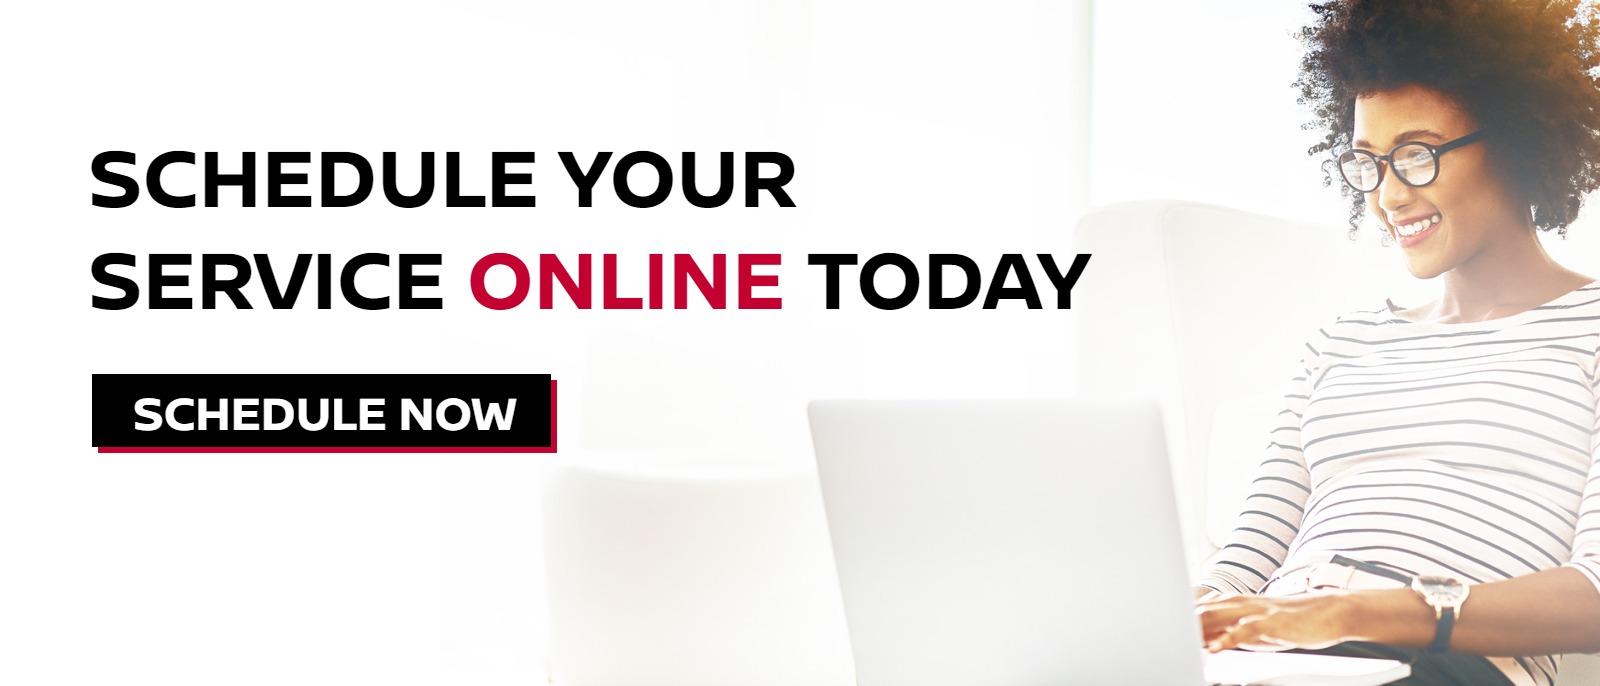 SCHEDULE YOUR SERVICE ONLINE TODAY